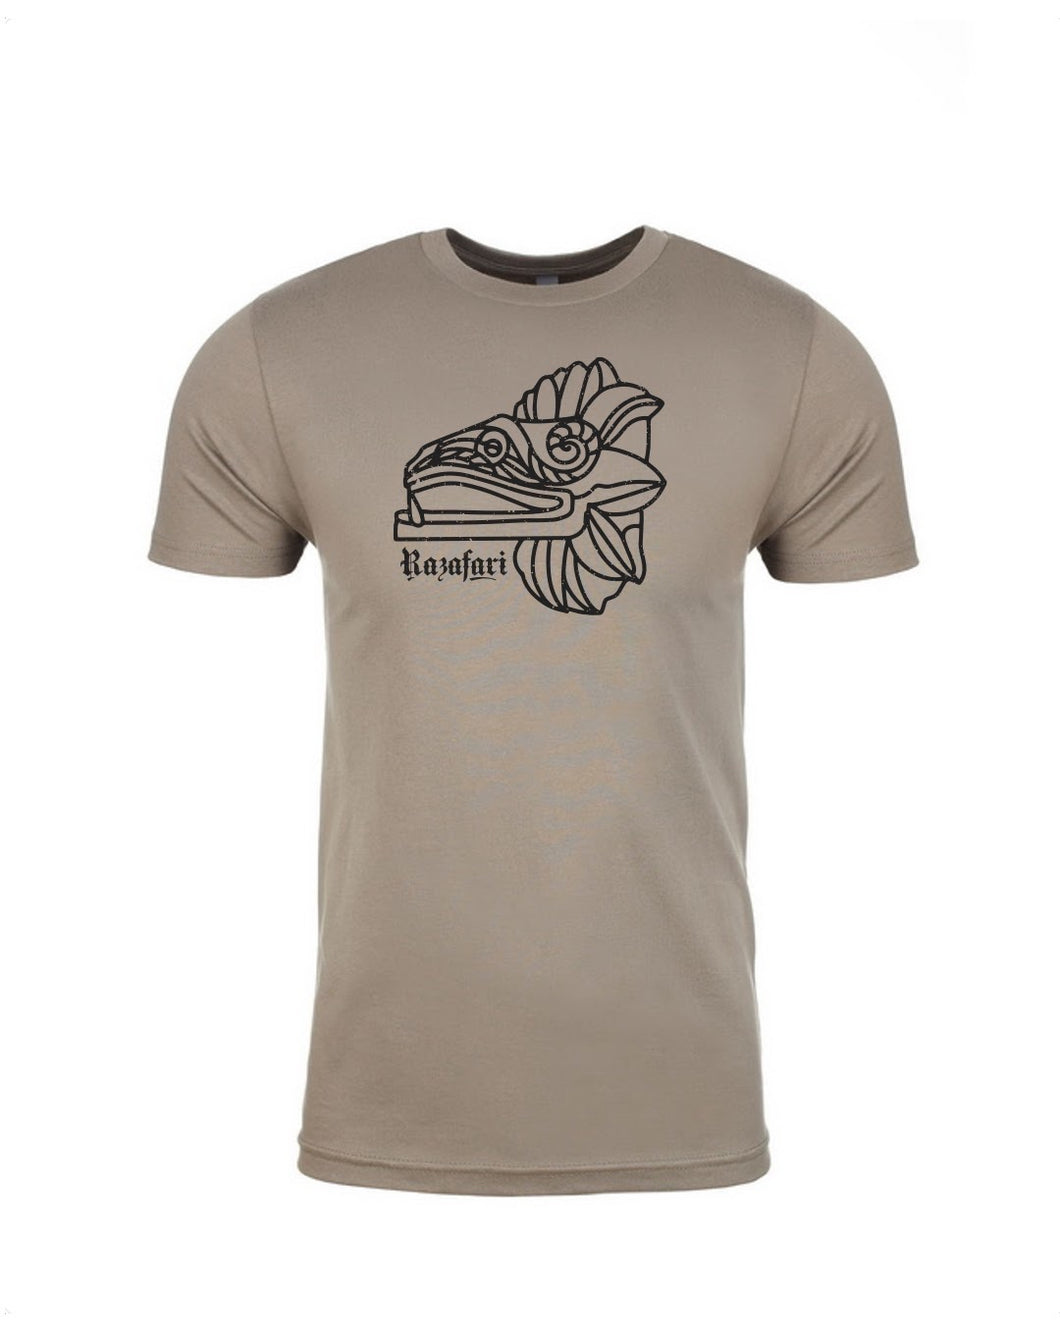 Feathered Serpent T-shirt - Warm Grey